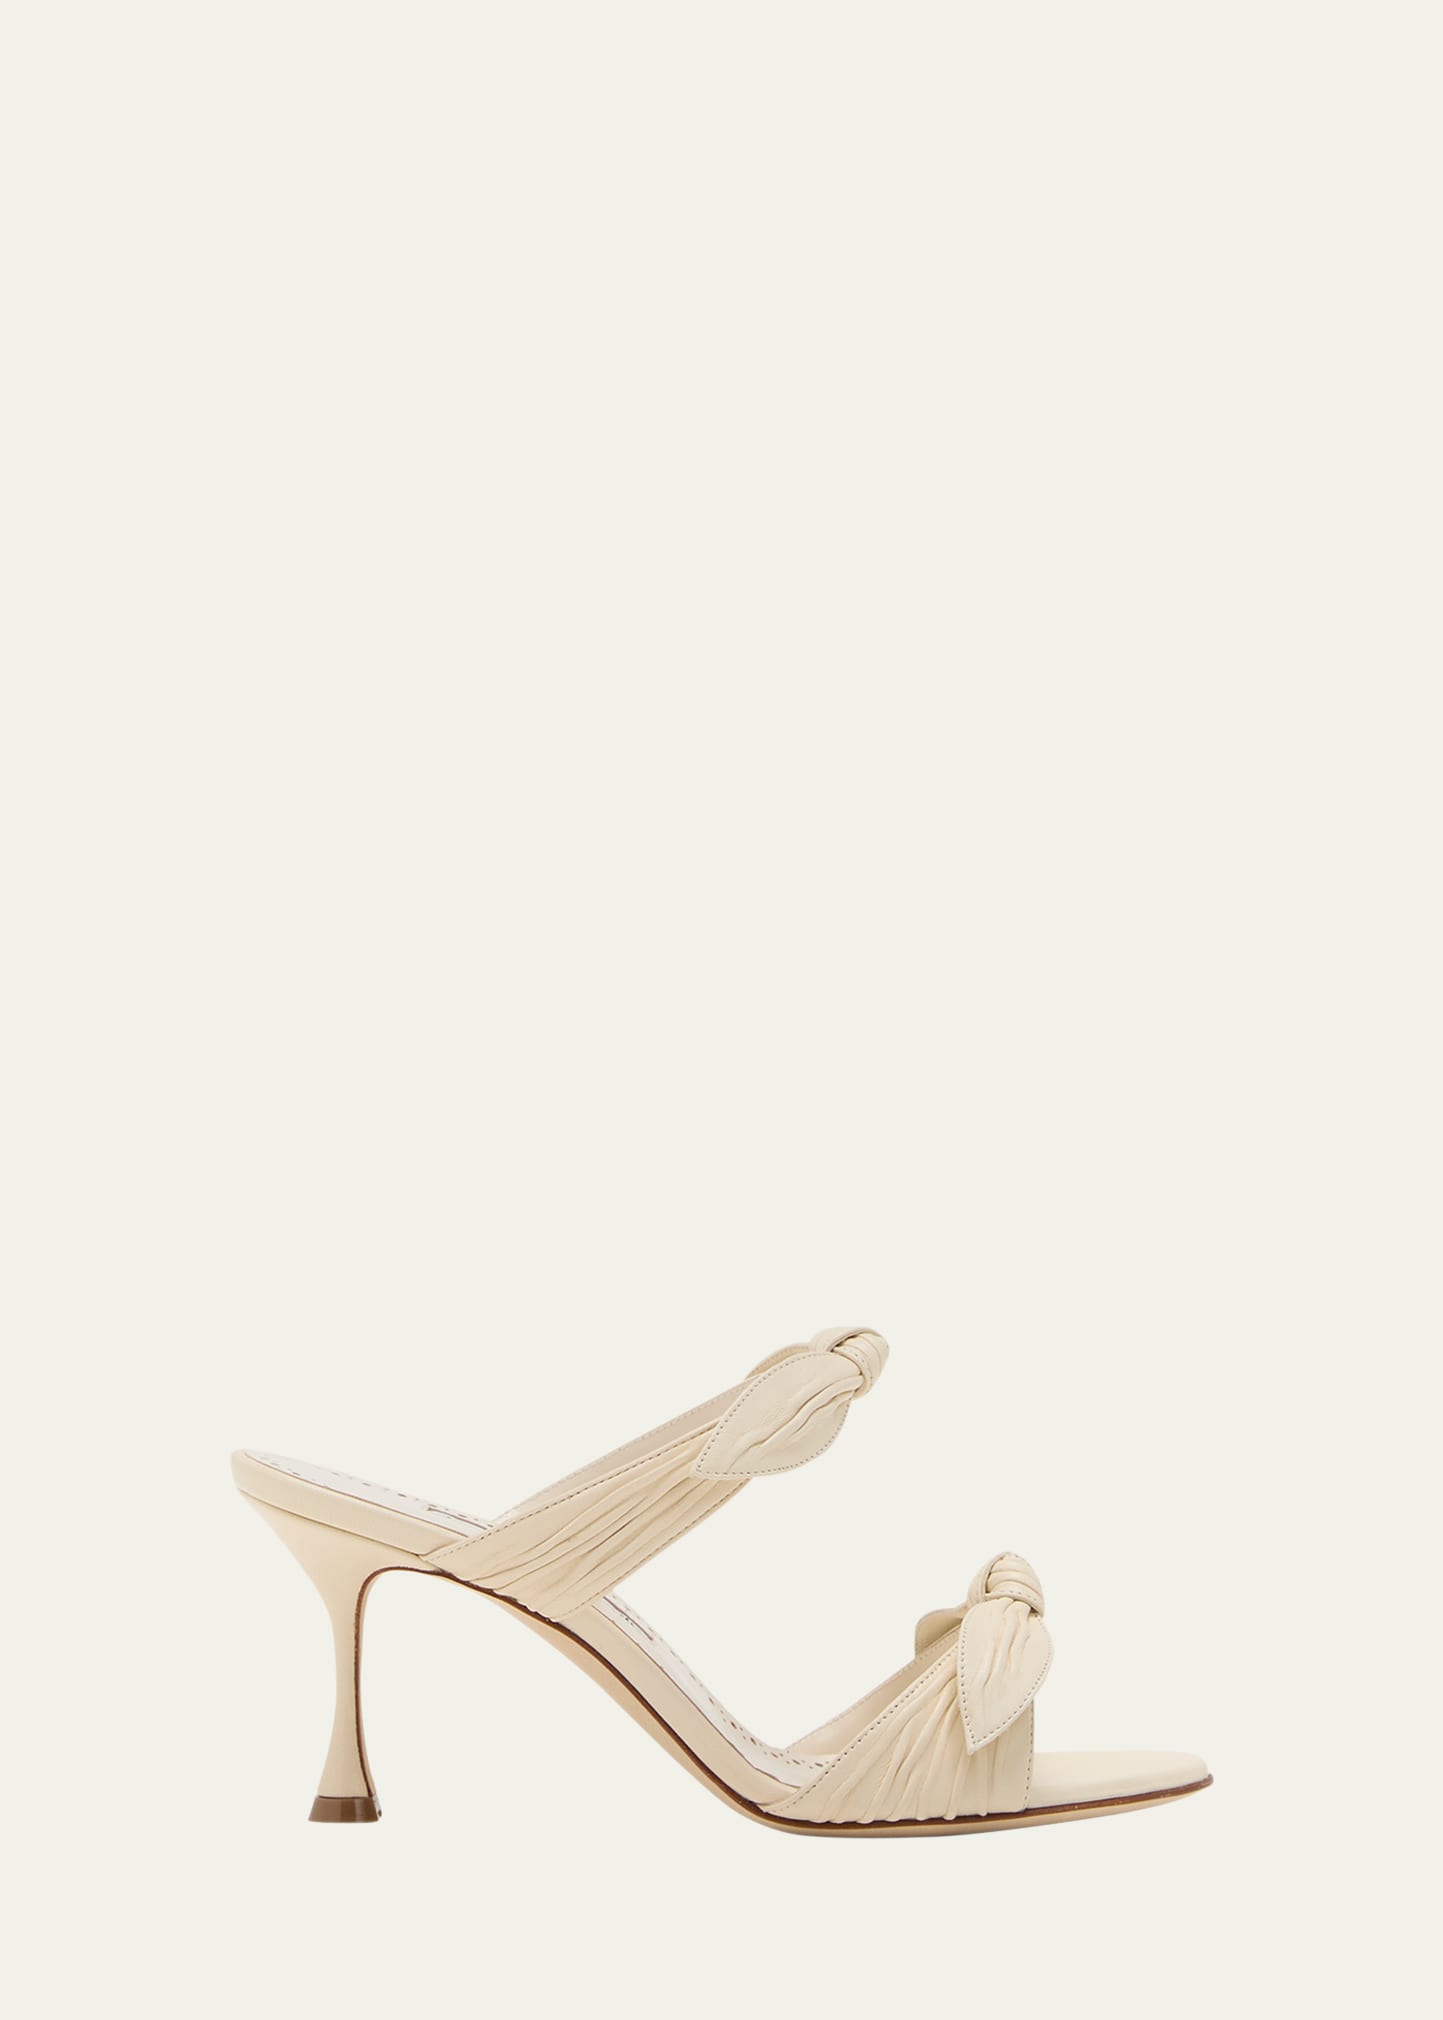 Manolo Blahnik Lollo Knotted Bow Slide Sandals In Neutral